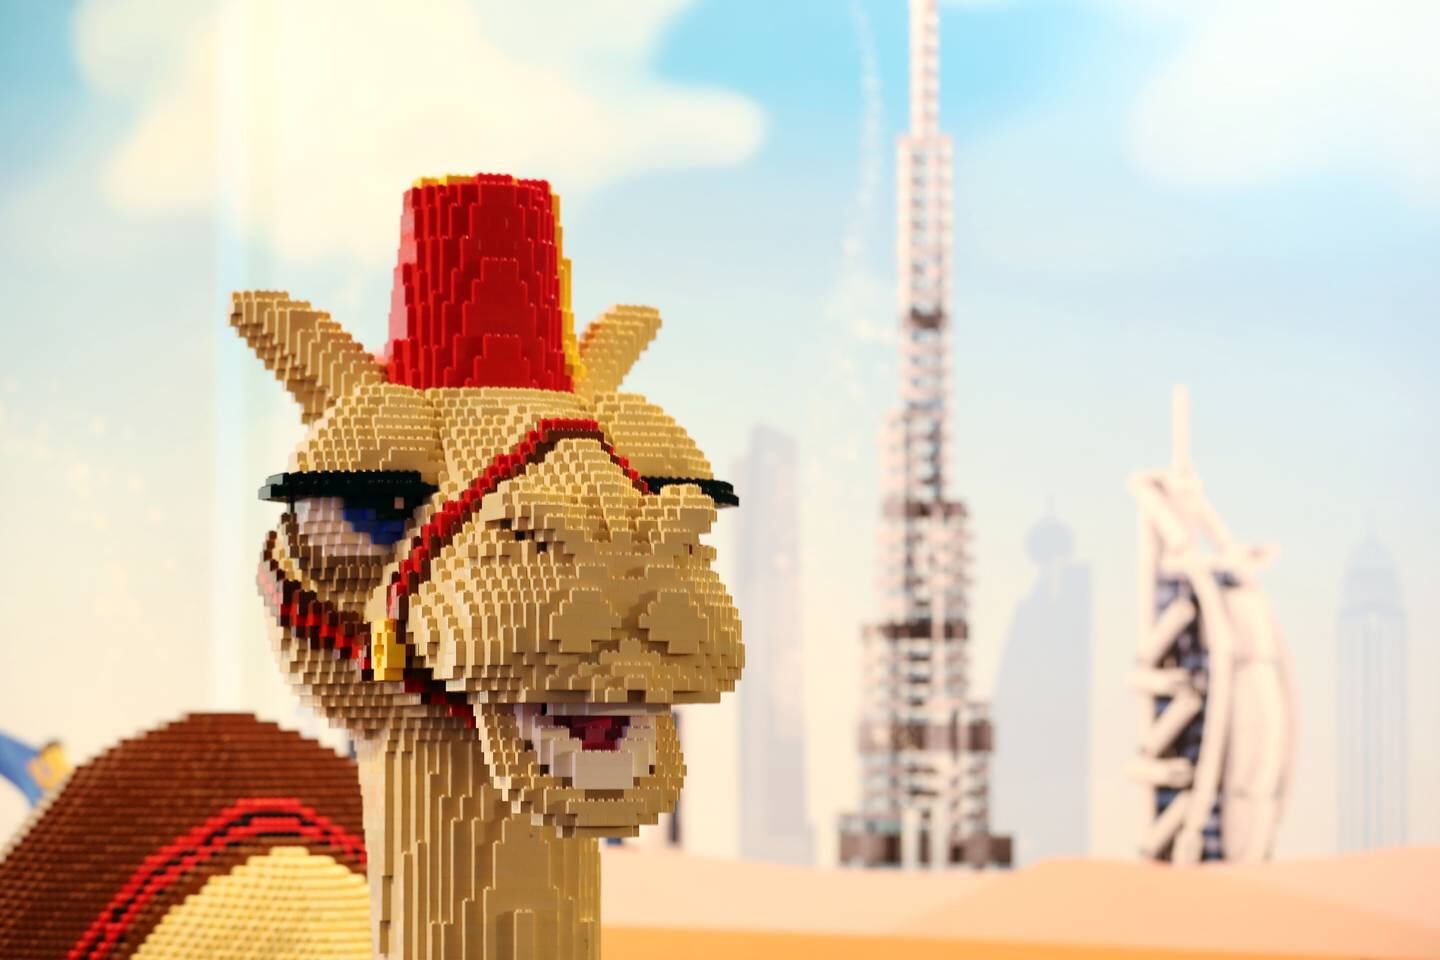 Keep an eye out for the Lego camel at Legoland Hotel in Dubai. Chris Whiteoak / The National